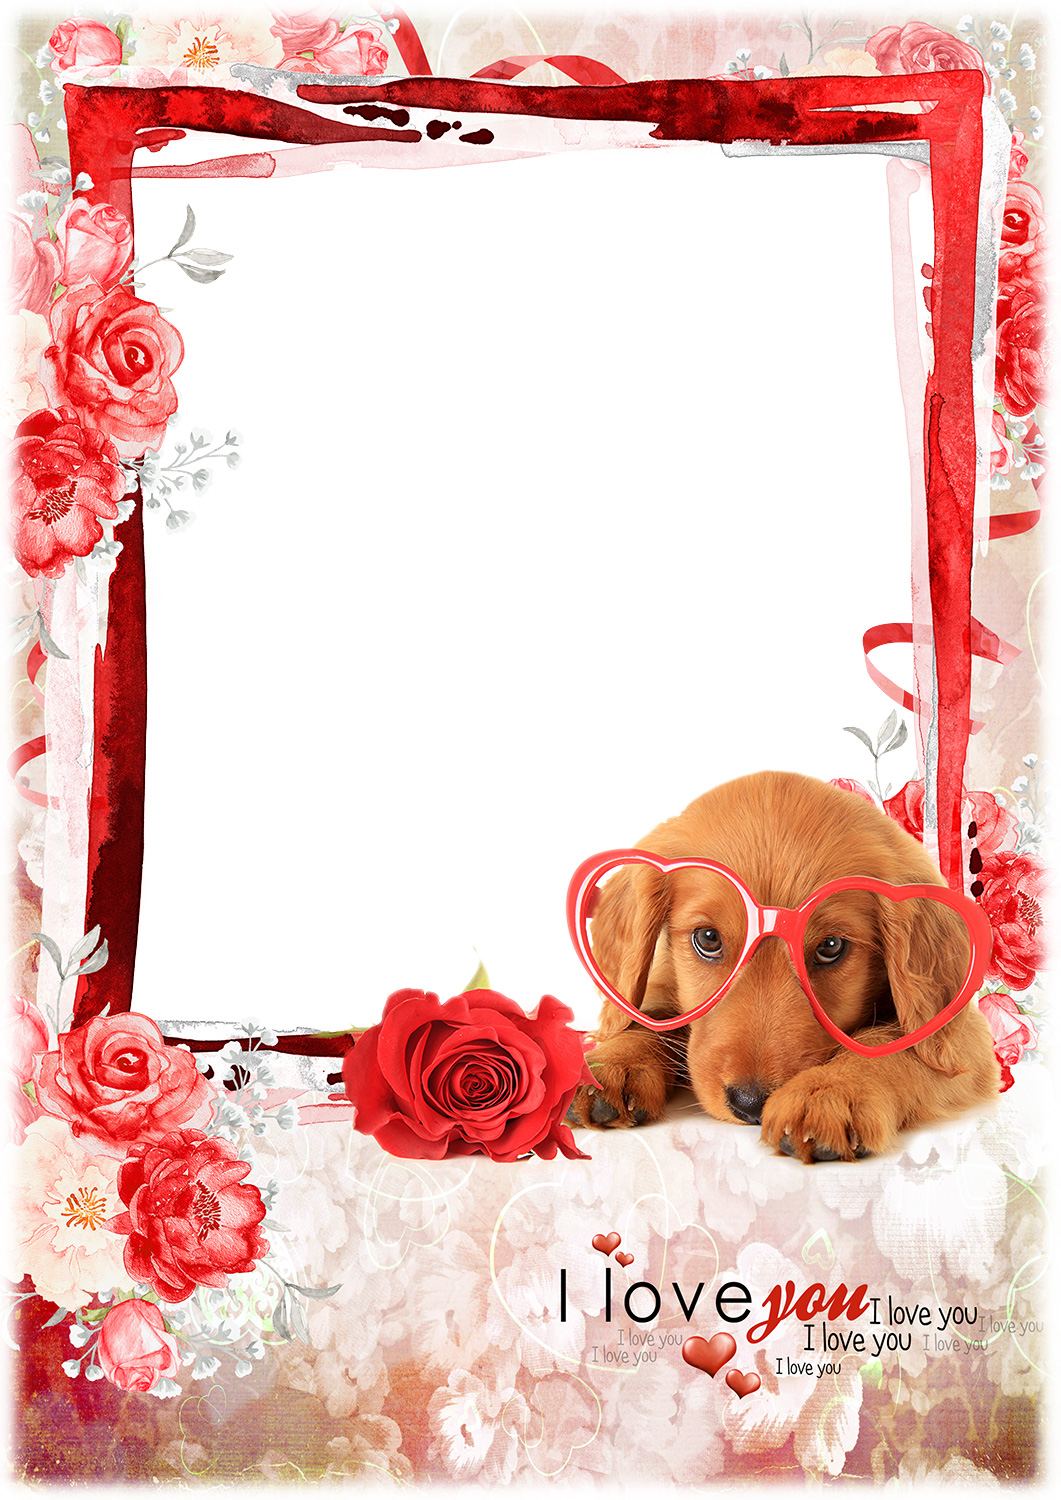 Say Love You With A Photo Frame With A Cute Dog - Love You Frame Png Transparent - HD Wallpaper 